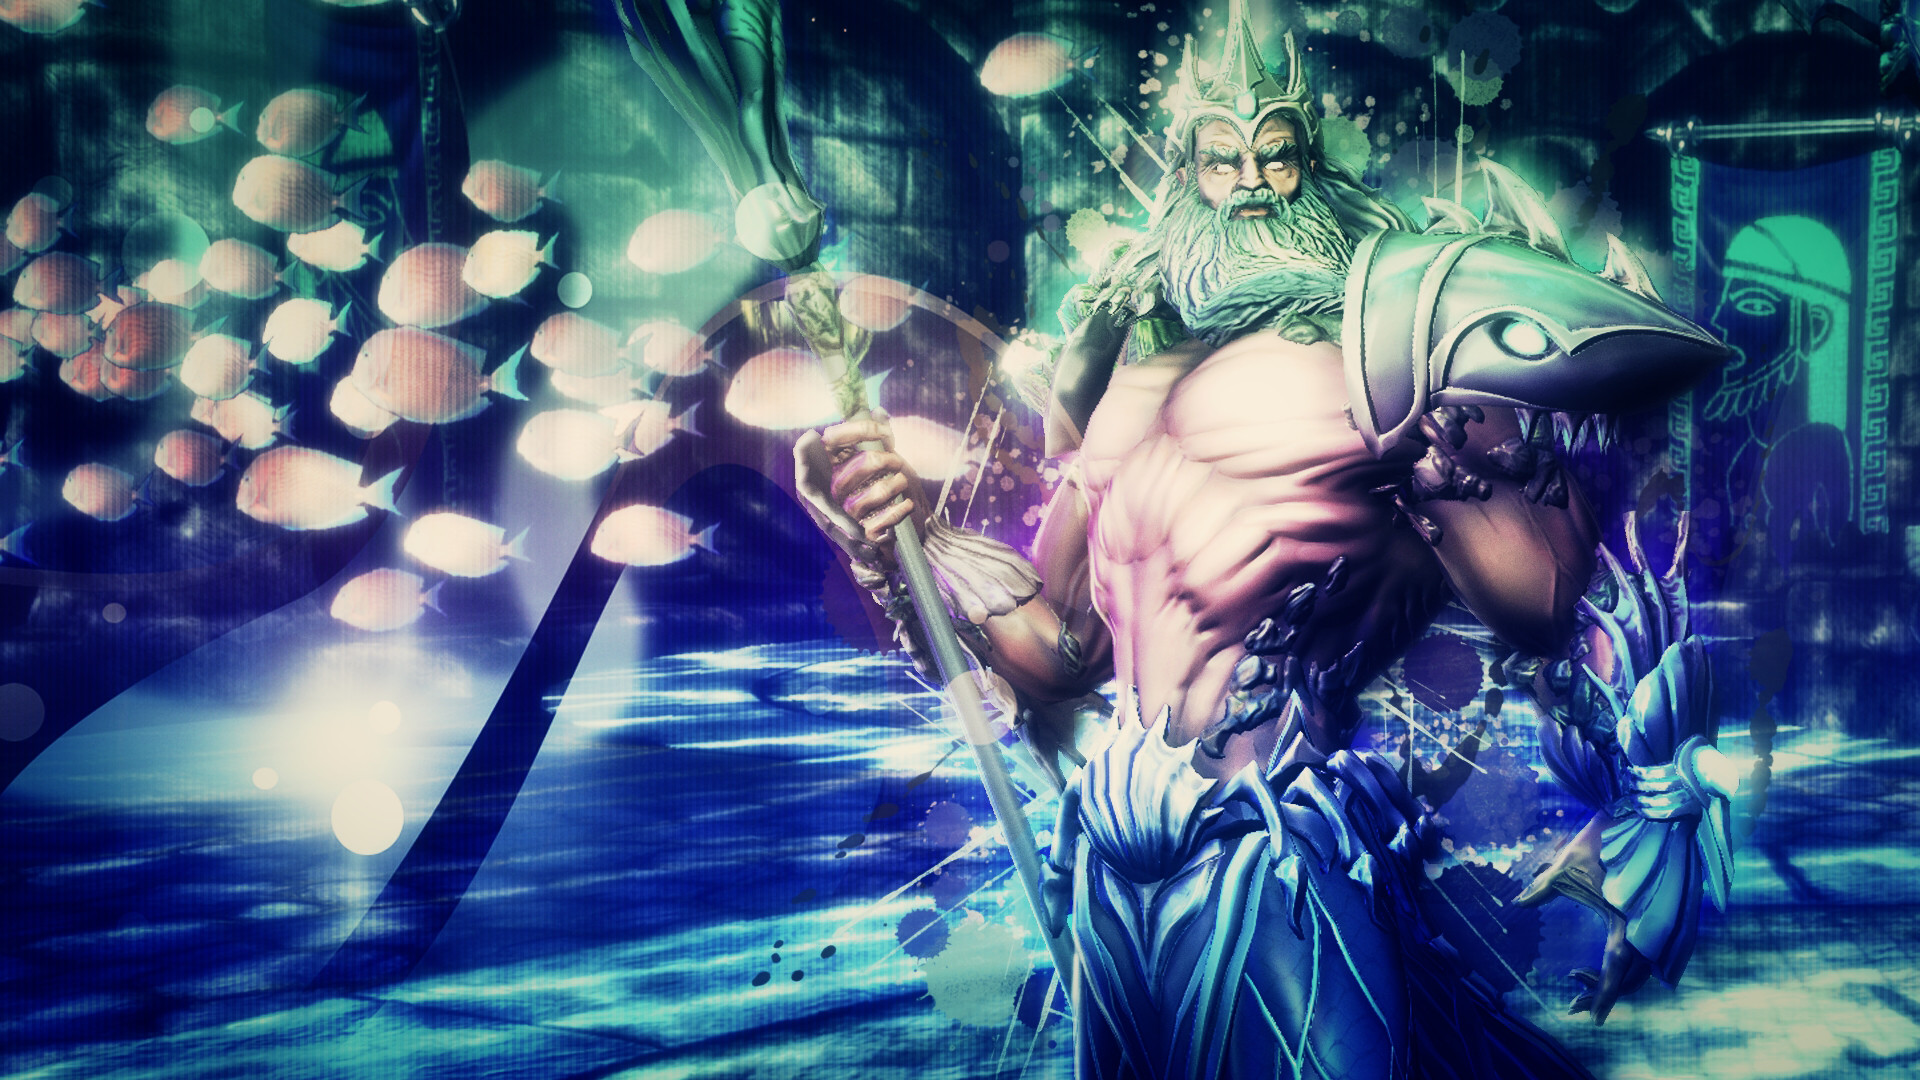 1920x1080 ... God of The Oceans (Smite) - Wallpaper by Getsukeii